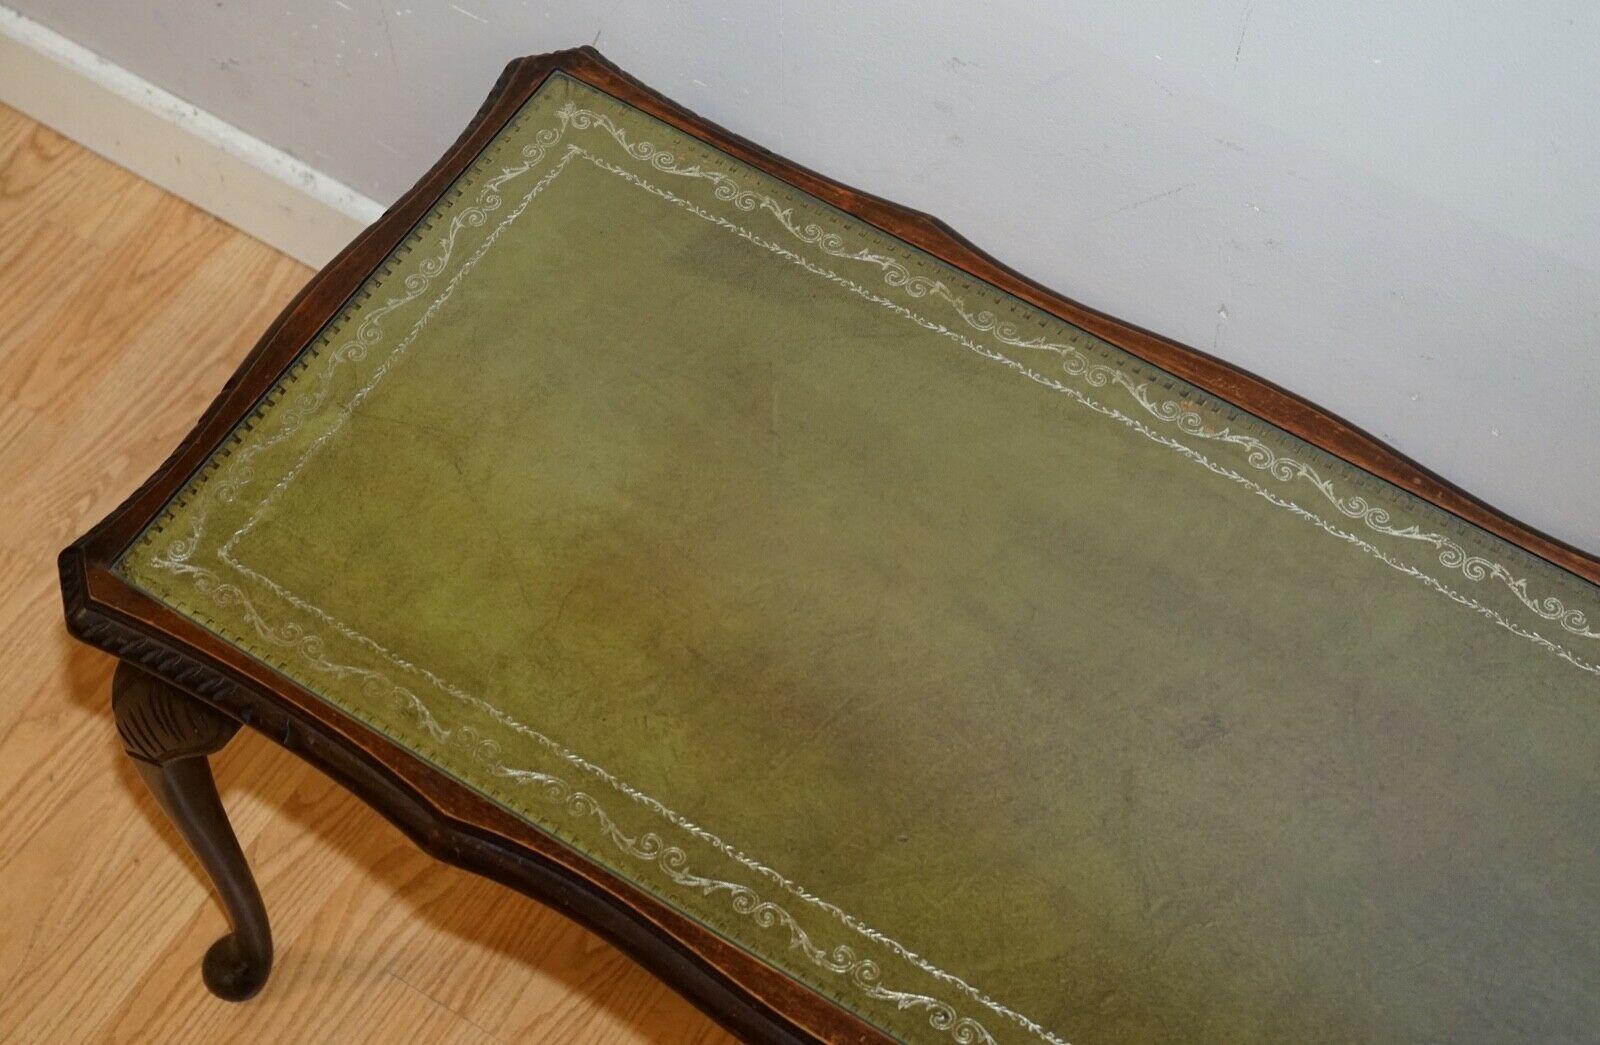 antique leather top coffee table